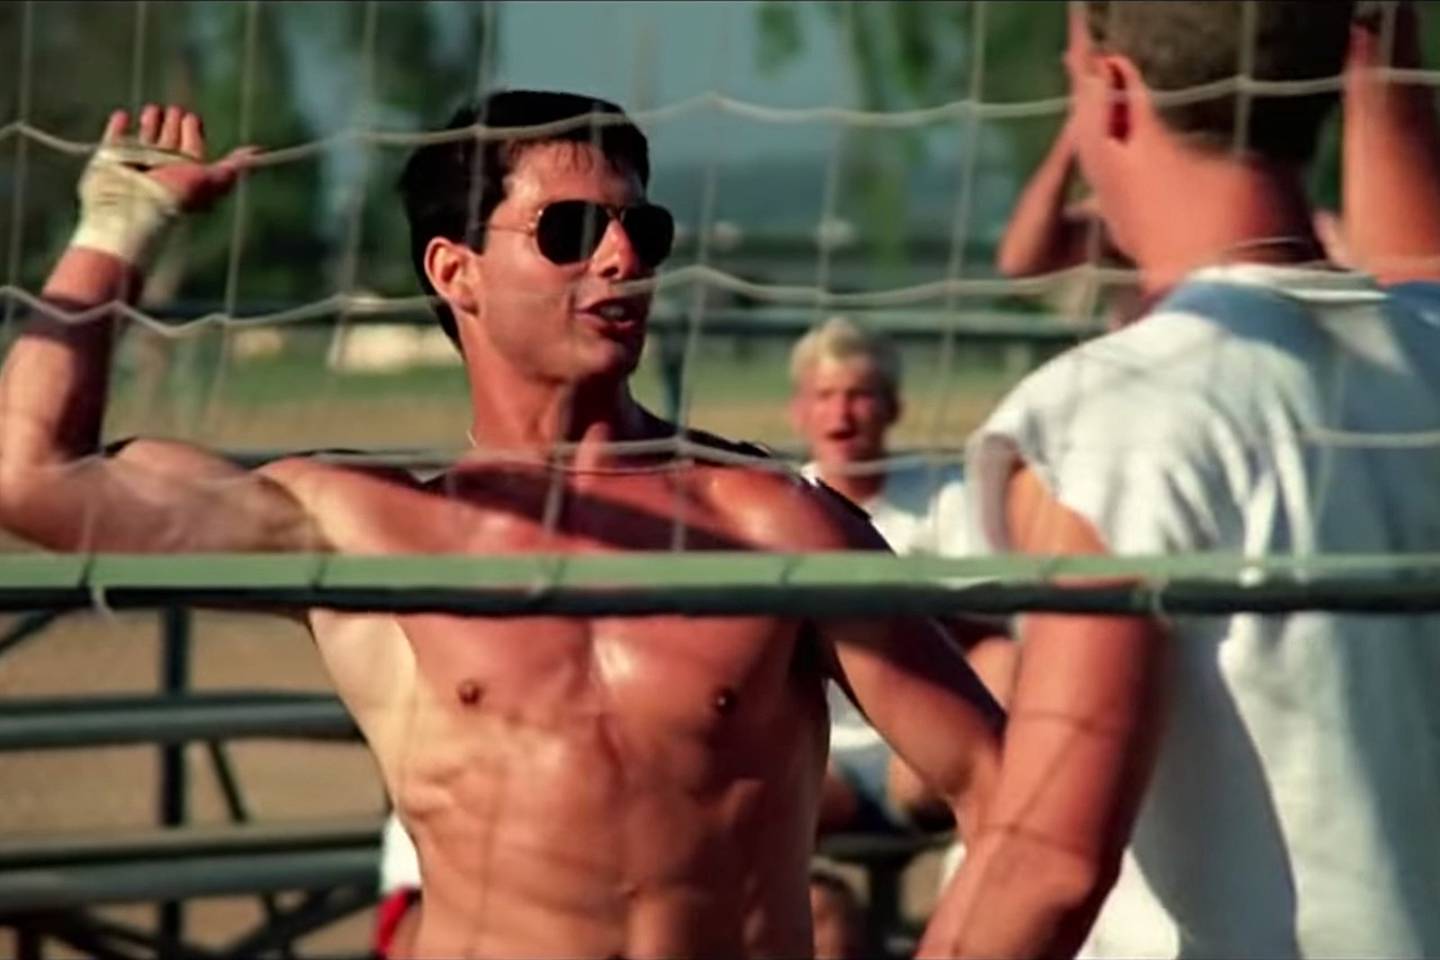 The volleyball game in 'Top Gun' is one of the film's most famous scenes. Photo: Paramount Pictures